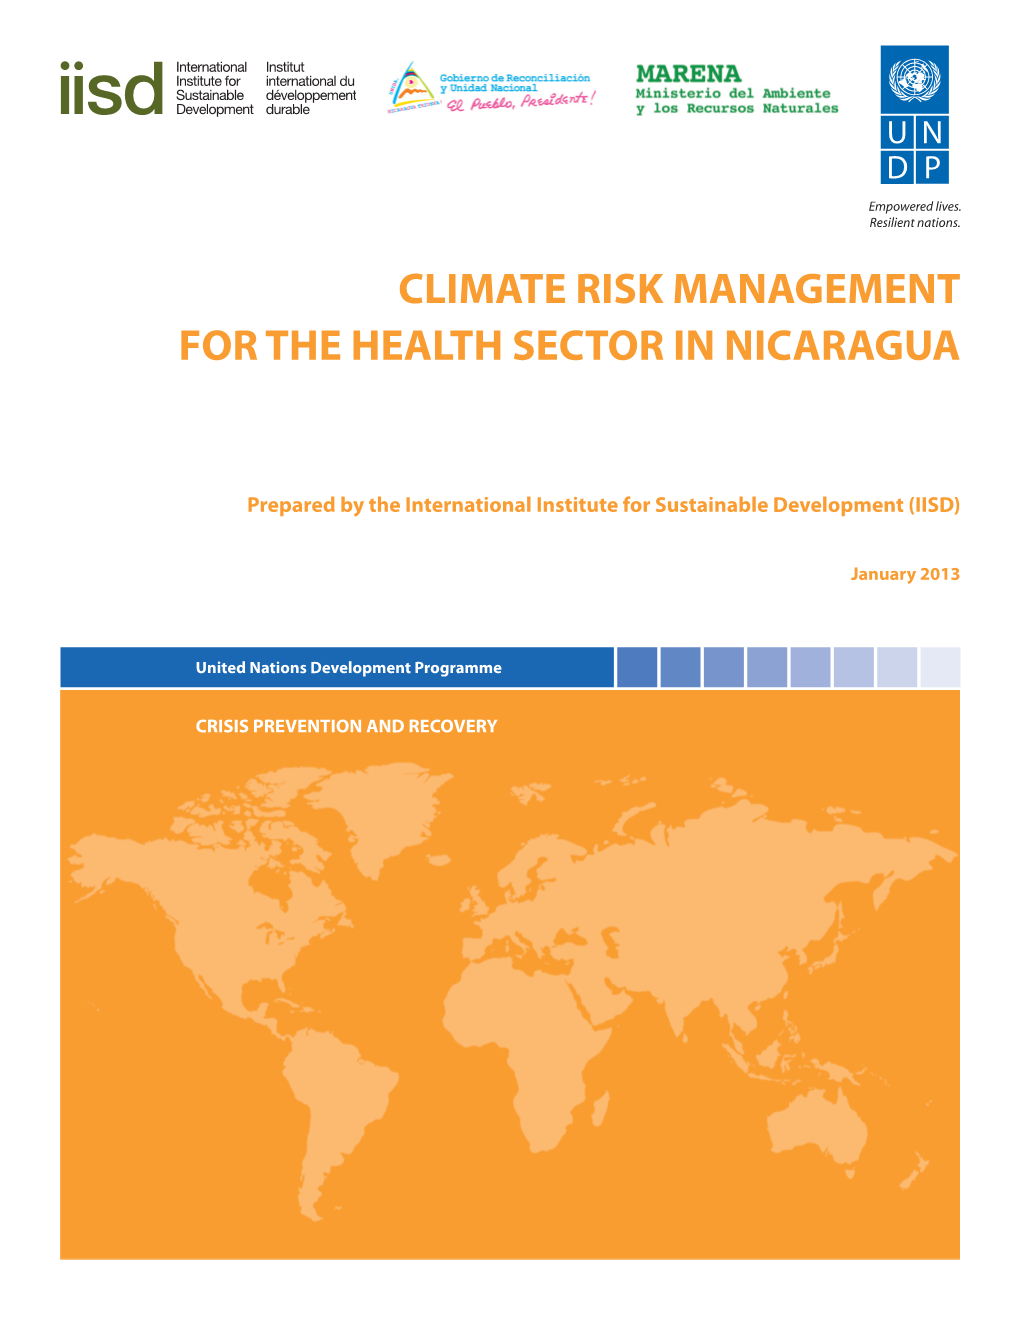 Climate Risk Management for the Health Sector in Nicaragua